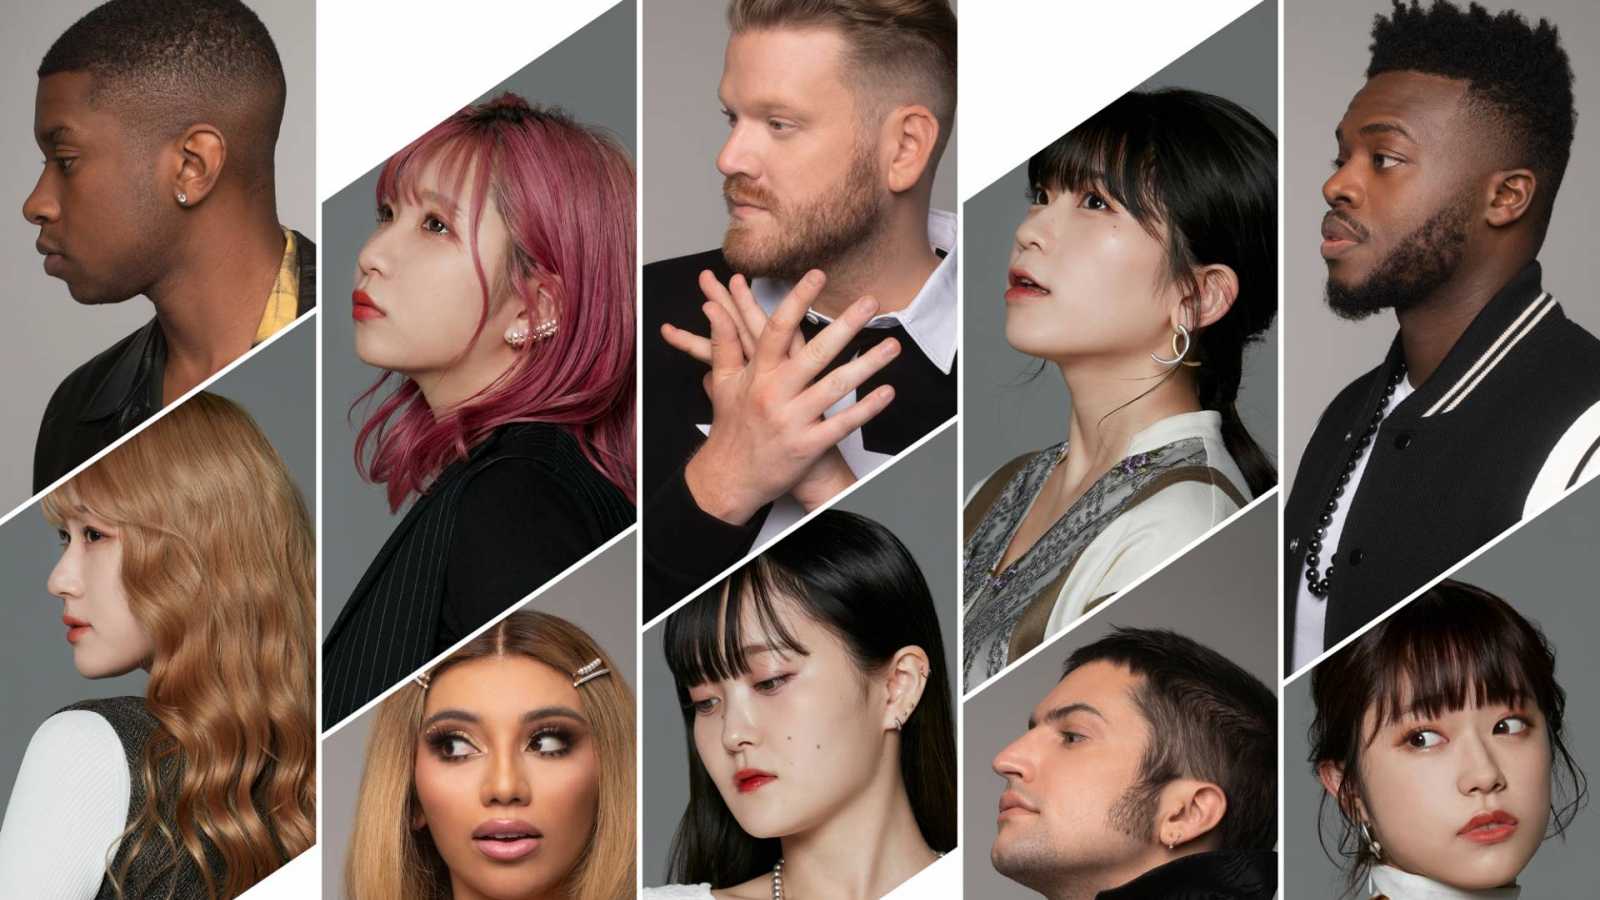 Little Glee Monster to Release New Single Featuring Pentatonix © Little Glee Monster x Pentatonix. All rights reserved.